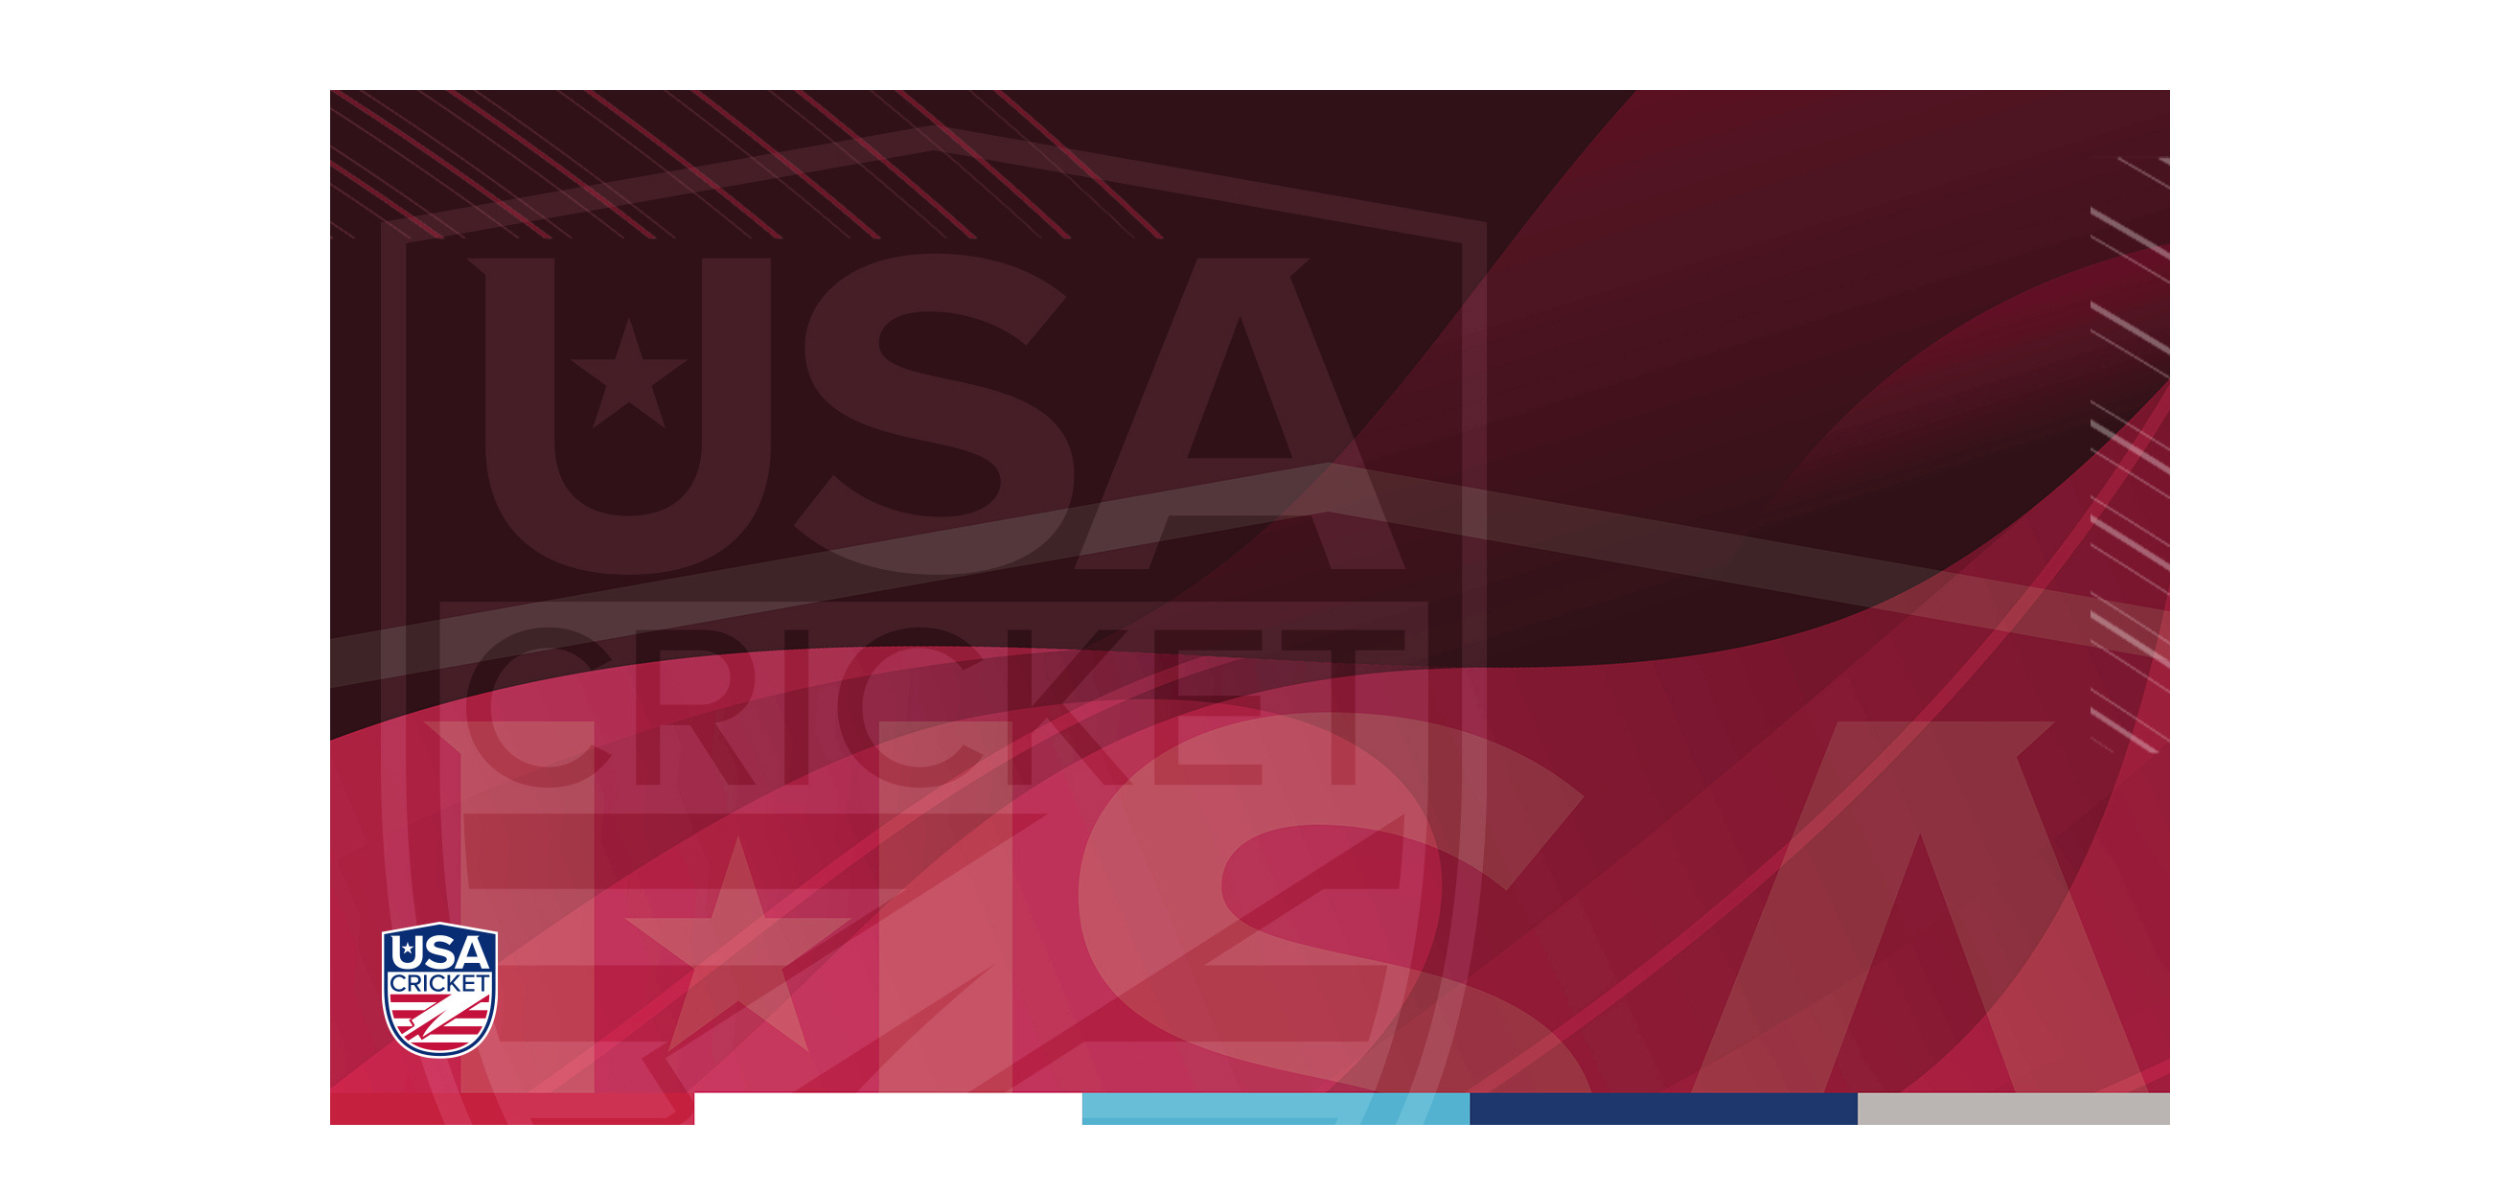 USA Cricket: Reminder Alert - NGC announces call for applications for three Board Directors in 2021 Elections, Independent Director submissions now closed